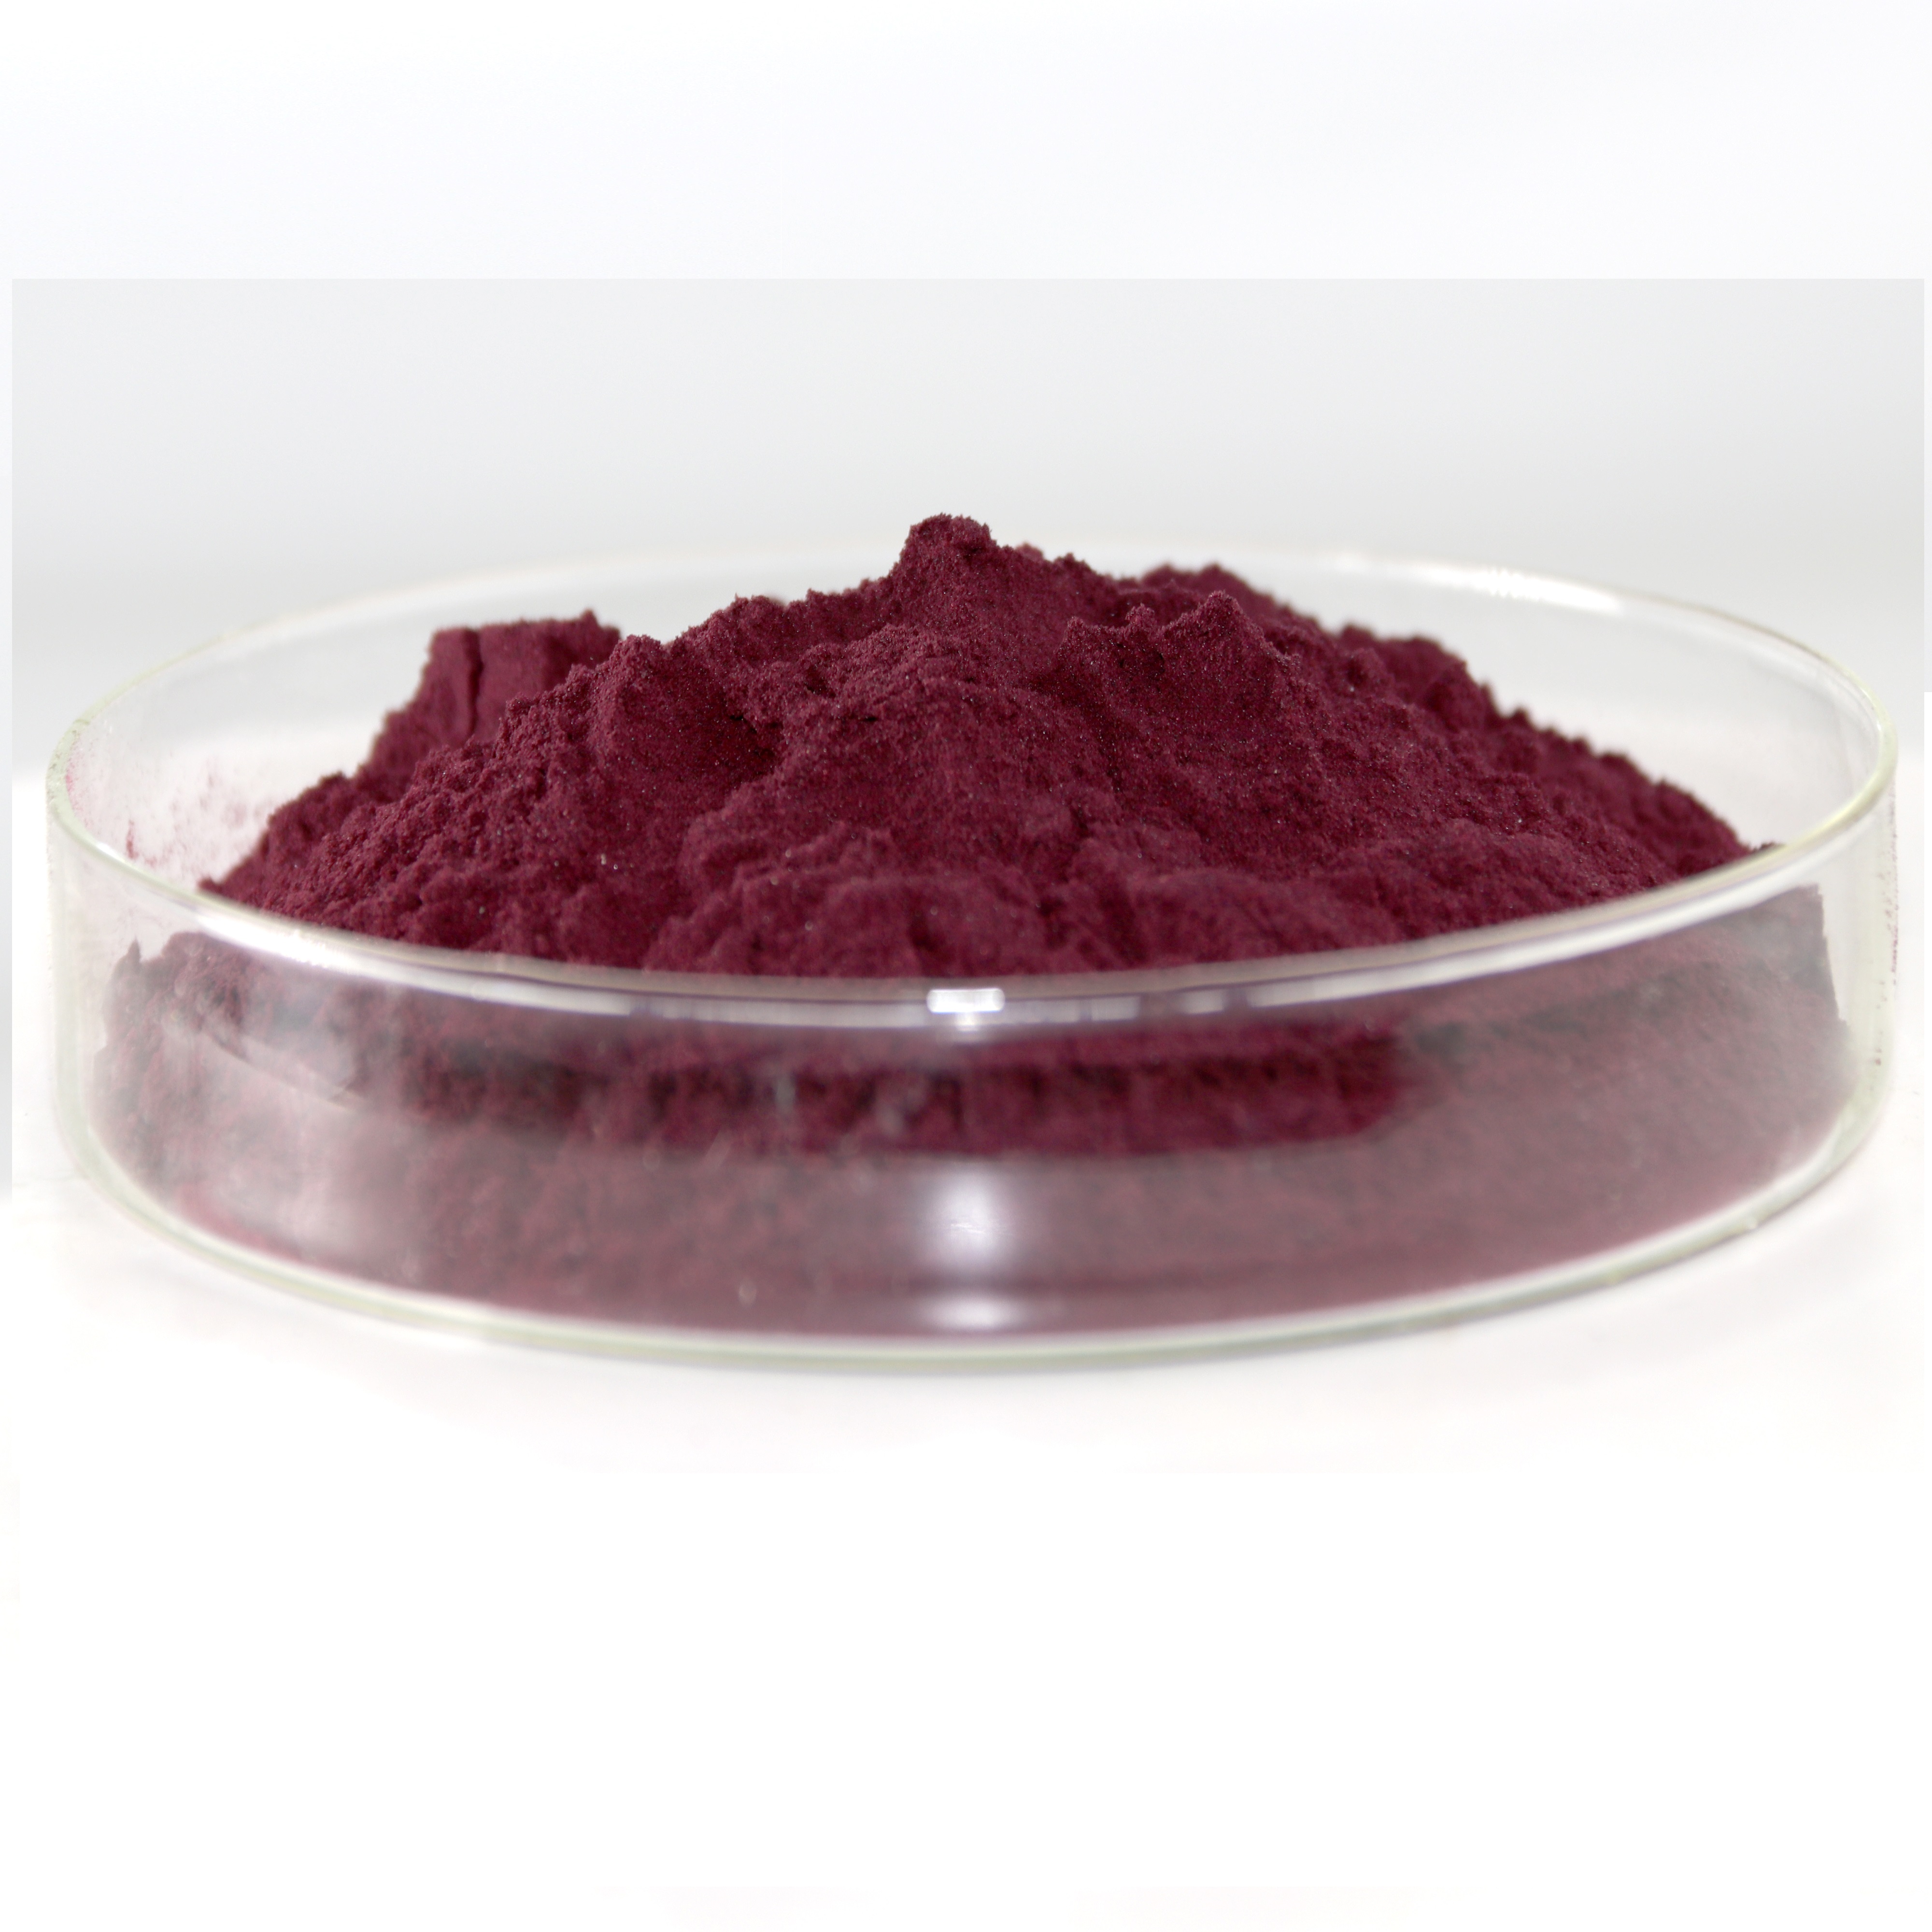 Gromwell Pigment extract